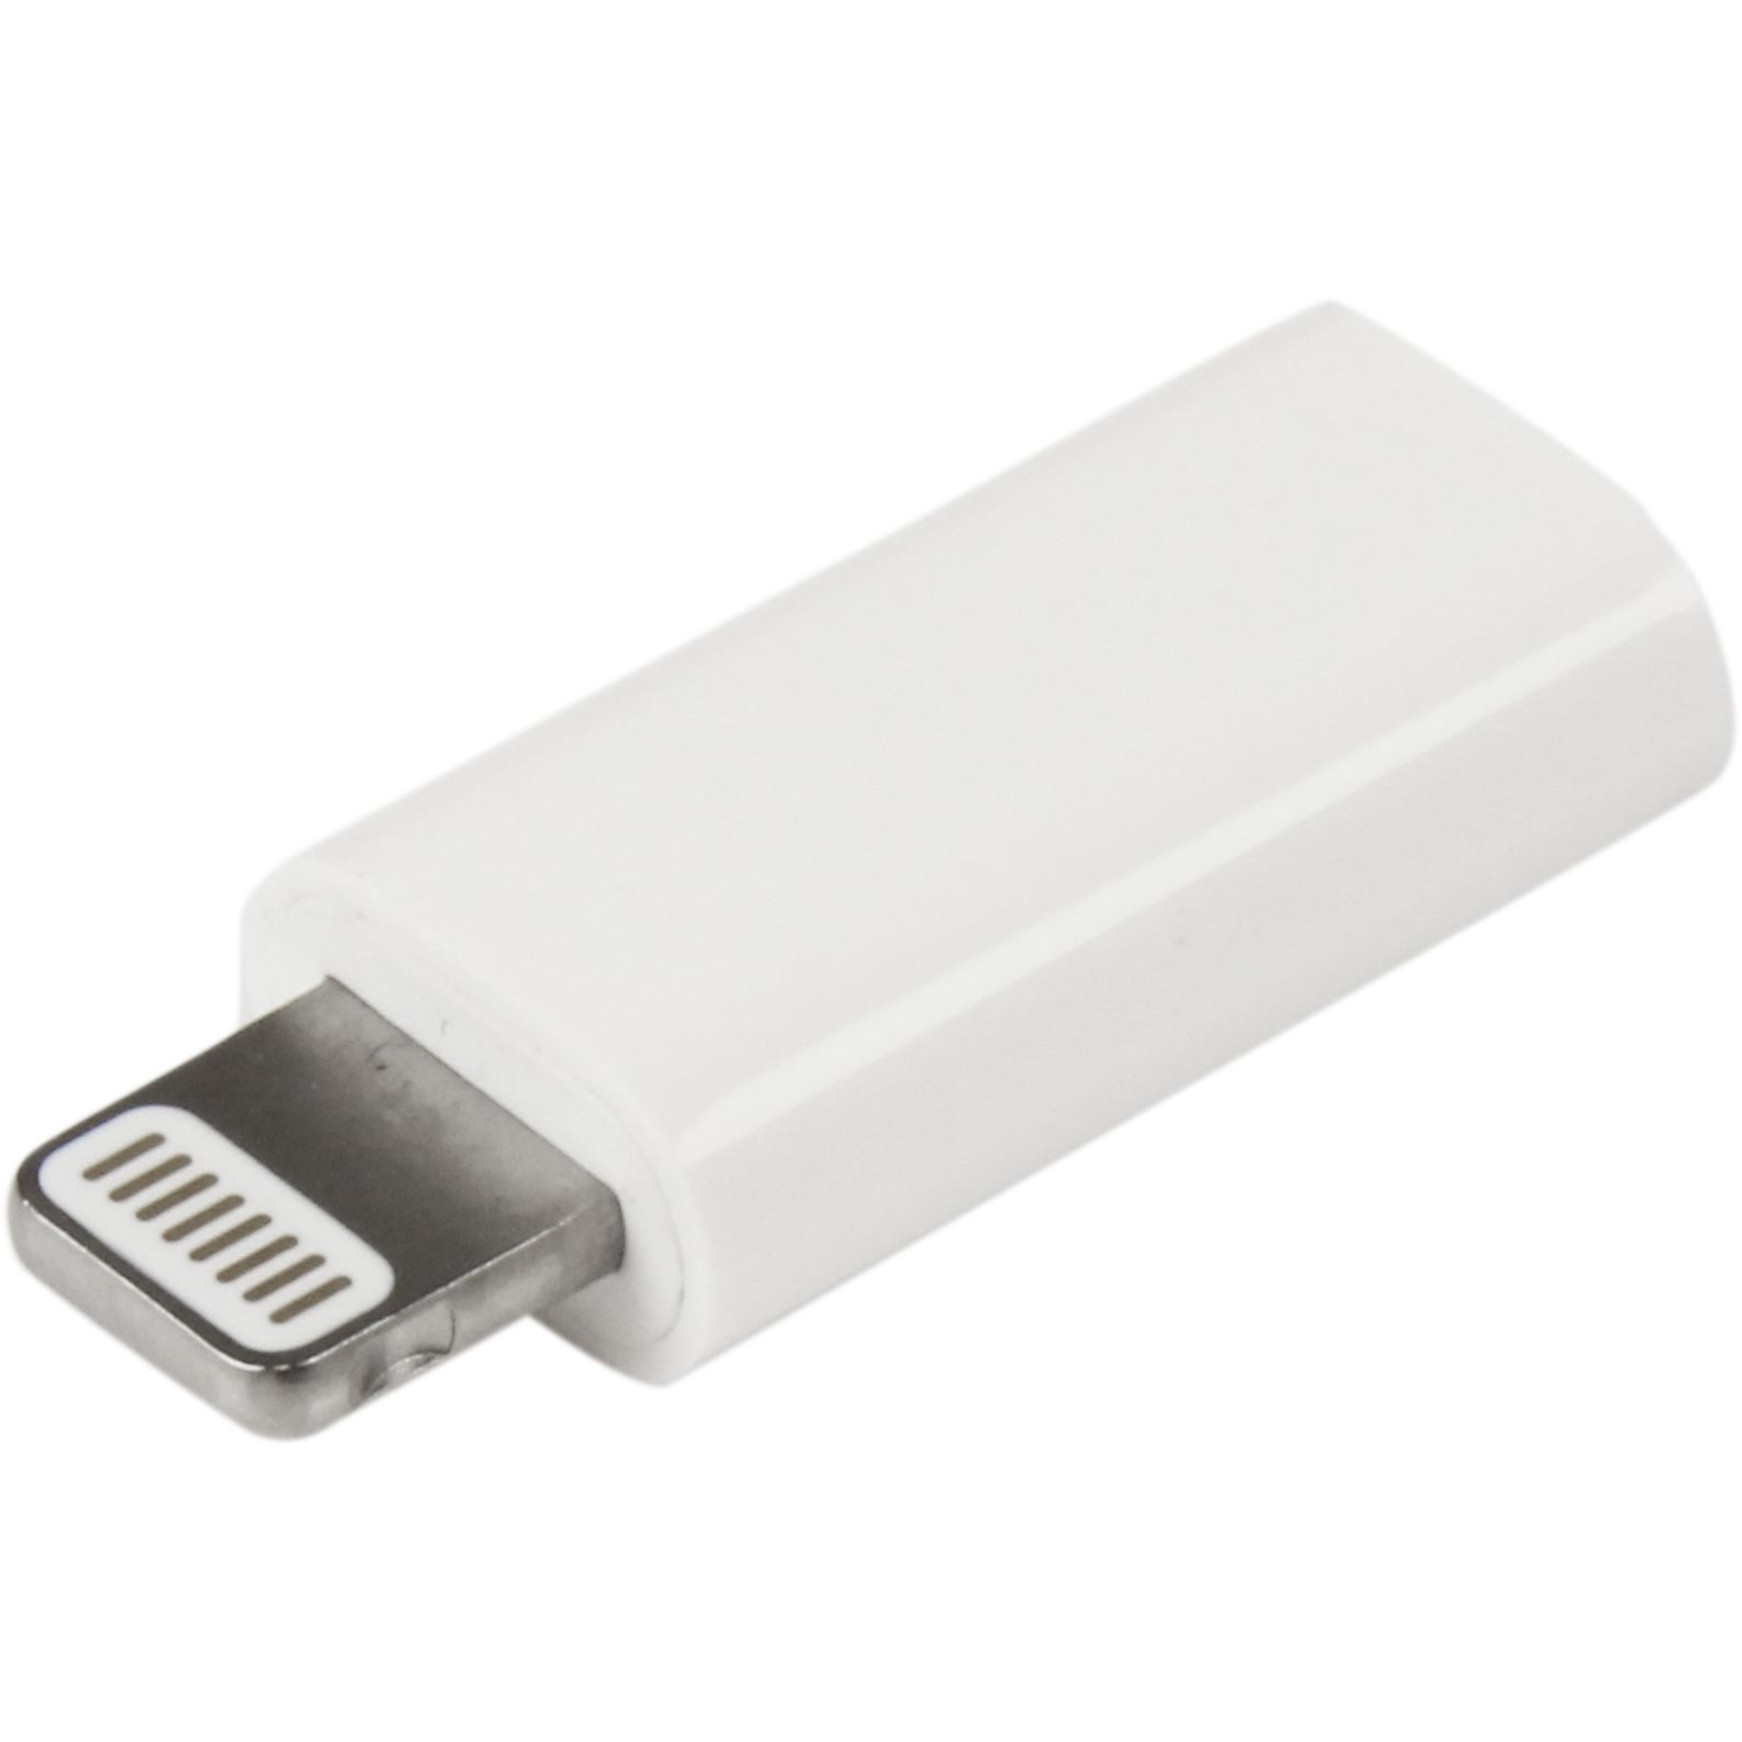 Startech .com White Apple 8-pin Lightning Connector to Micro USB Adapter for iPhone / iPod / iPadCharge or Sync your iPhone, iPod, or iPad… USBUBLTADPW